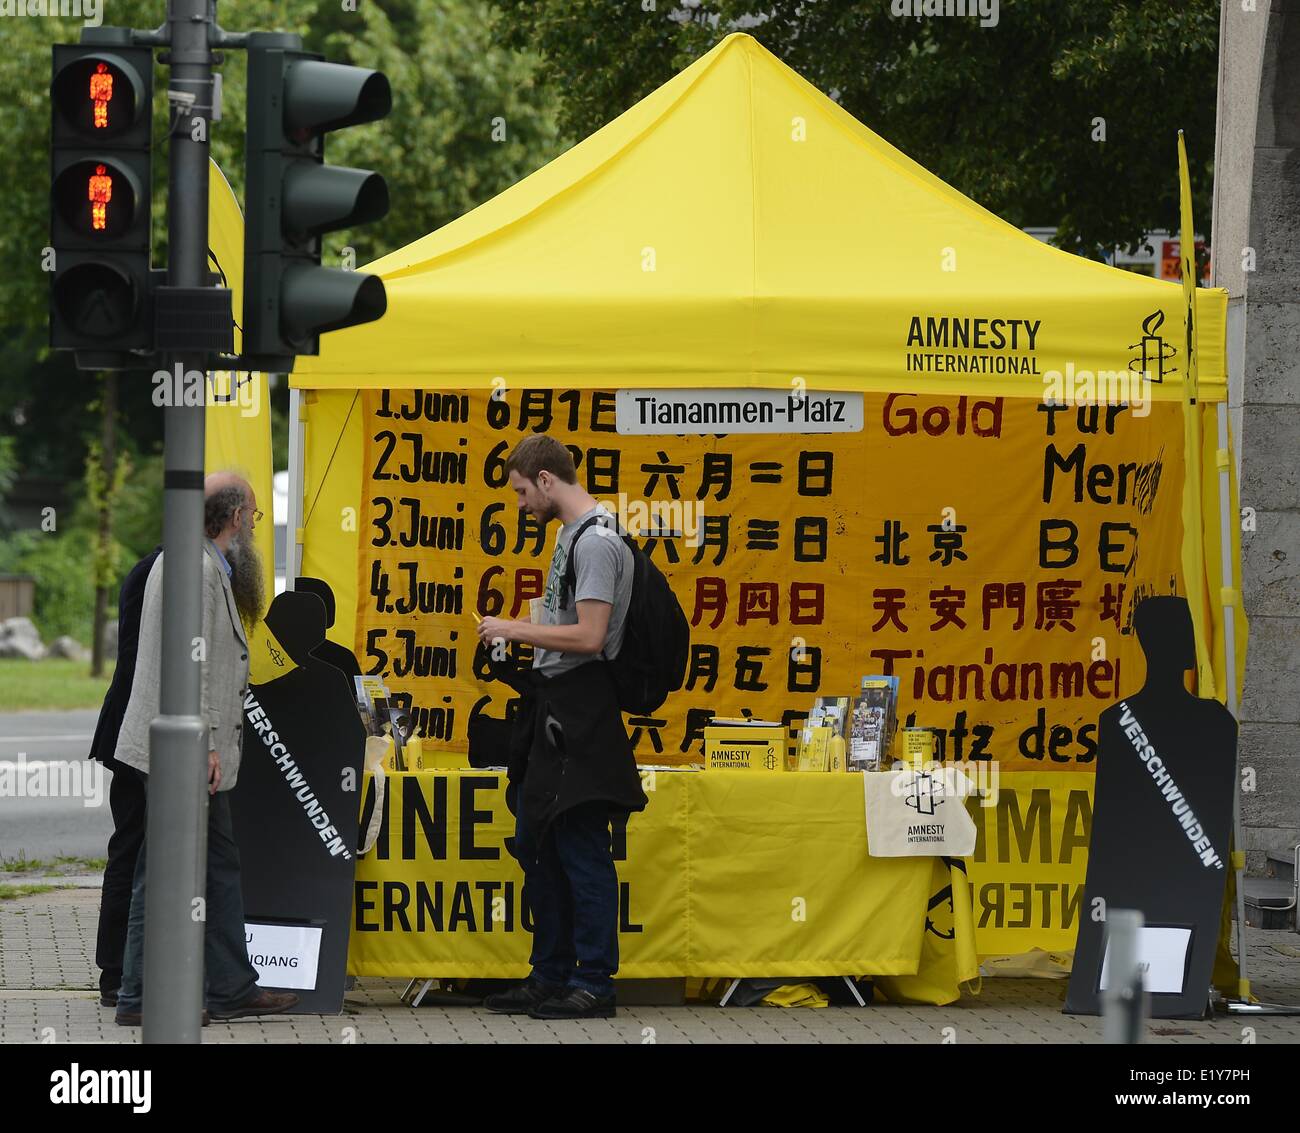 Wuppertal, Germany. 11th June, 2014. Amnesty International activists protest during the unveiling of the monument of the philosopher and social theorist Friedrich Engels (1820-1895) donated by the People's Republic of China in Wuppertal, Germany, 11 June 2014. The nearly four-meter bronze sculpture commemorates the co-founder of Marxism, who was born in Wuppertal. Credit:  dpa picture alliance/Alamy Live News Stock Photo